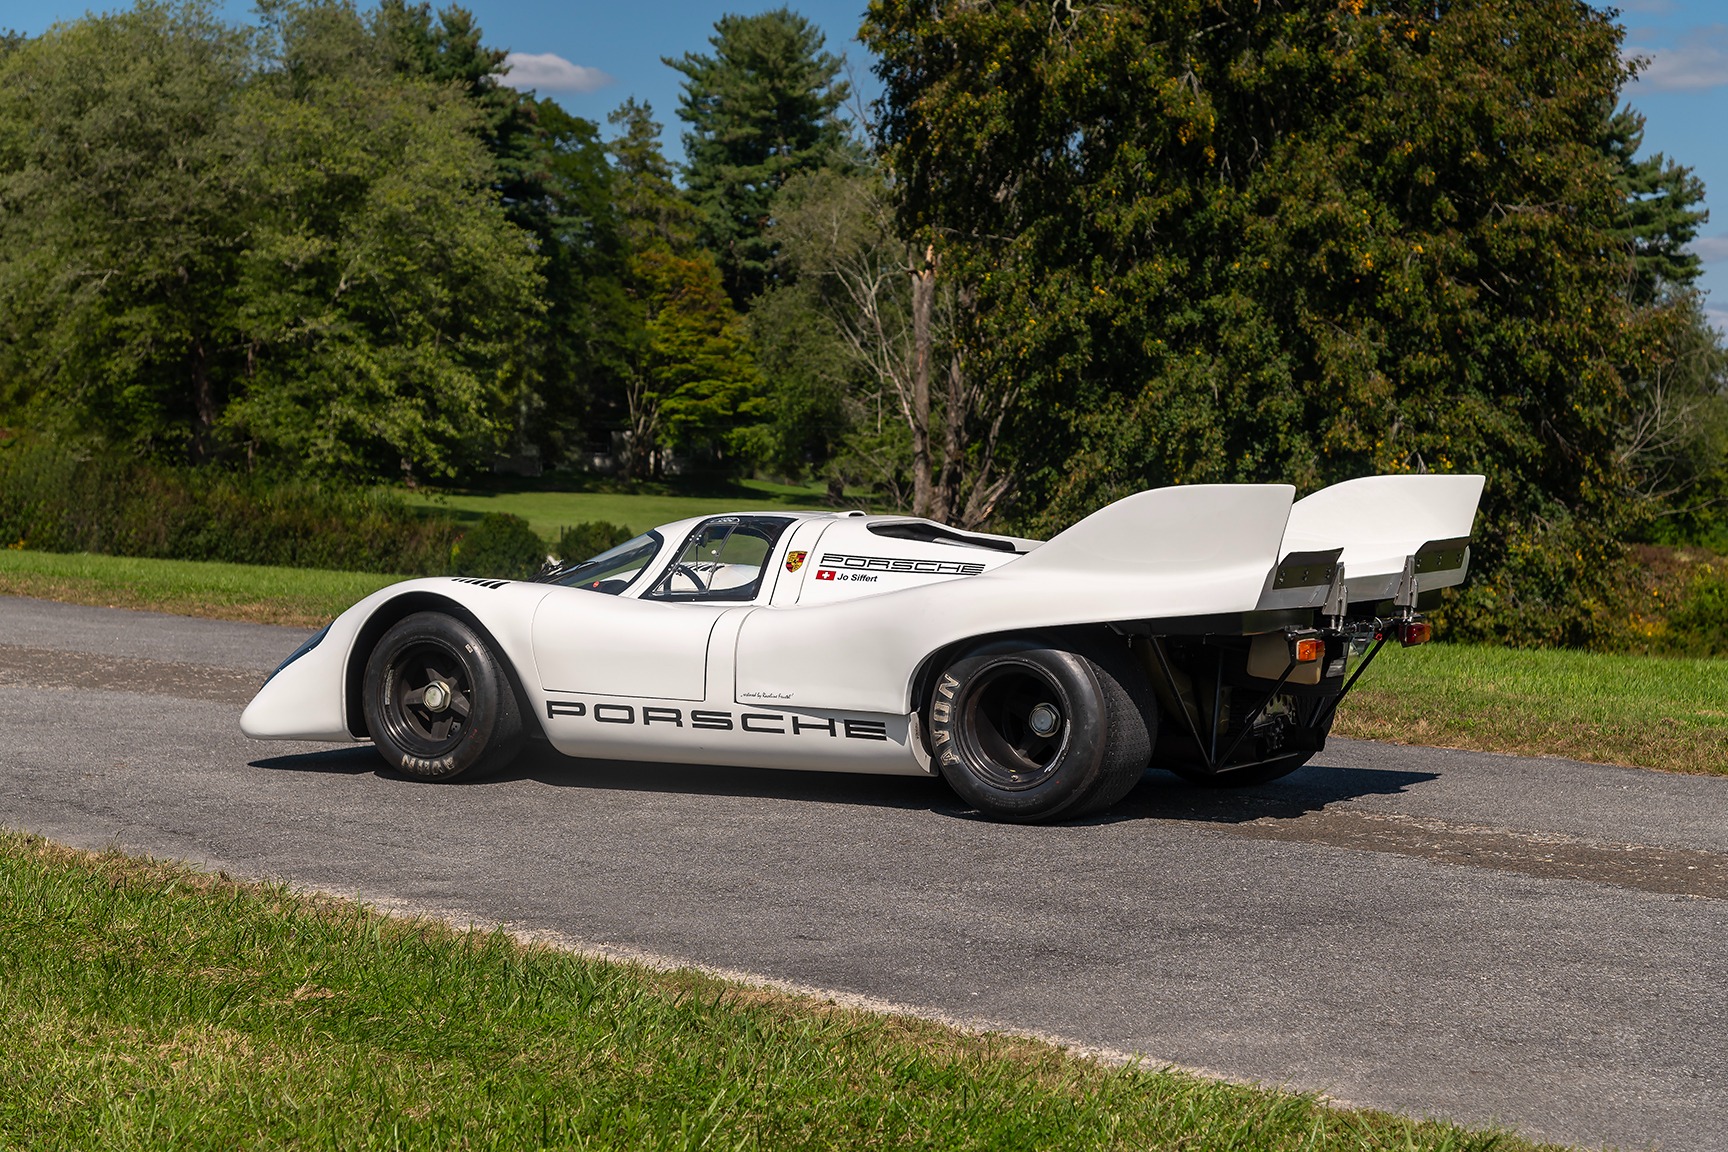 Used 1970 Porsche 917 For Sale (Call for price) | Motor Classic 